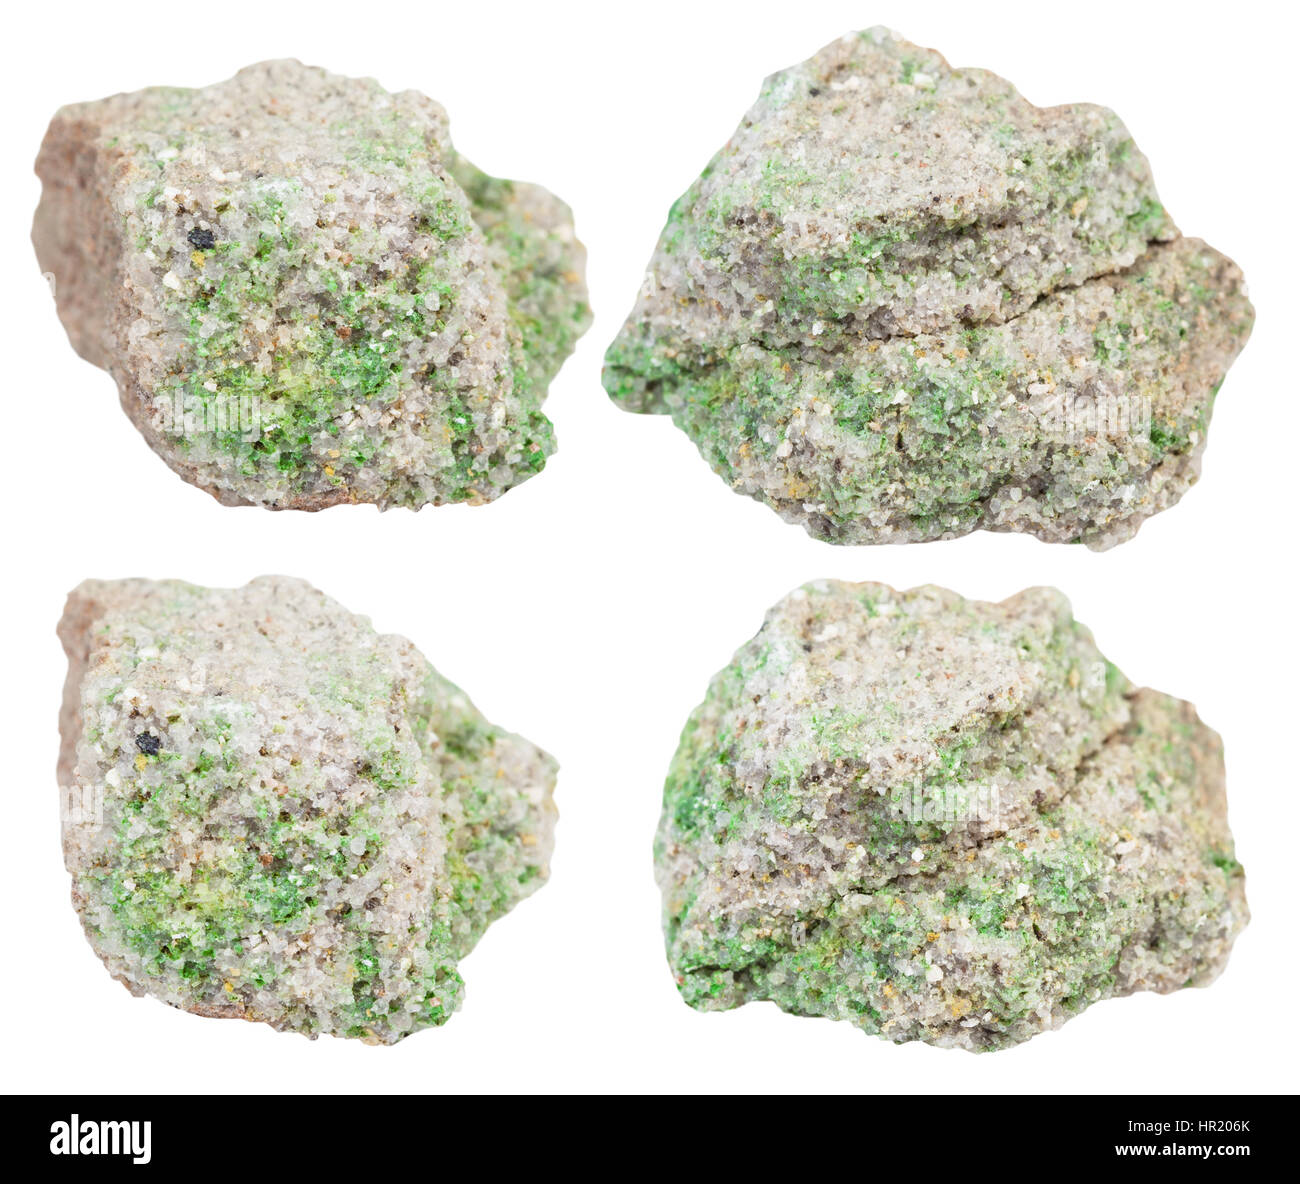 set of rock pieces with green pintadoite crystals on sandstone isolated on white background Stock Photo